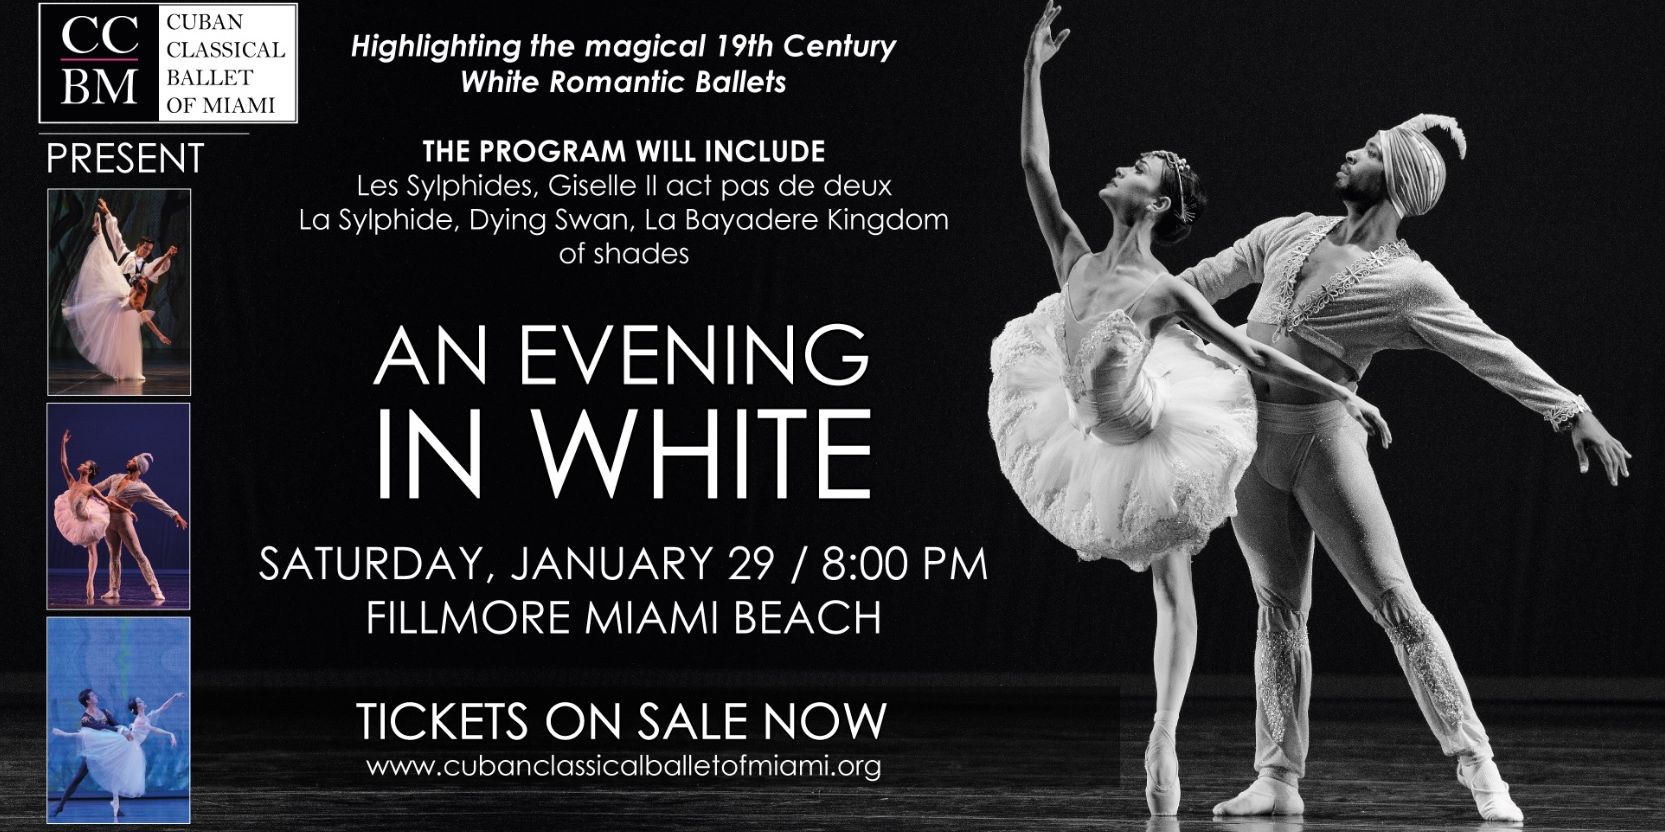 Cuban Classical Ballet of Miami / An Evening in White promotional image